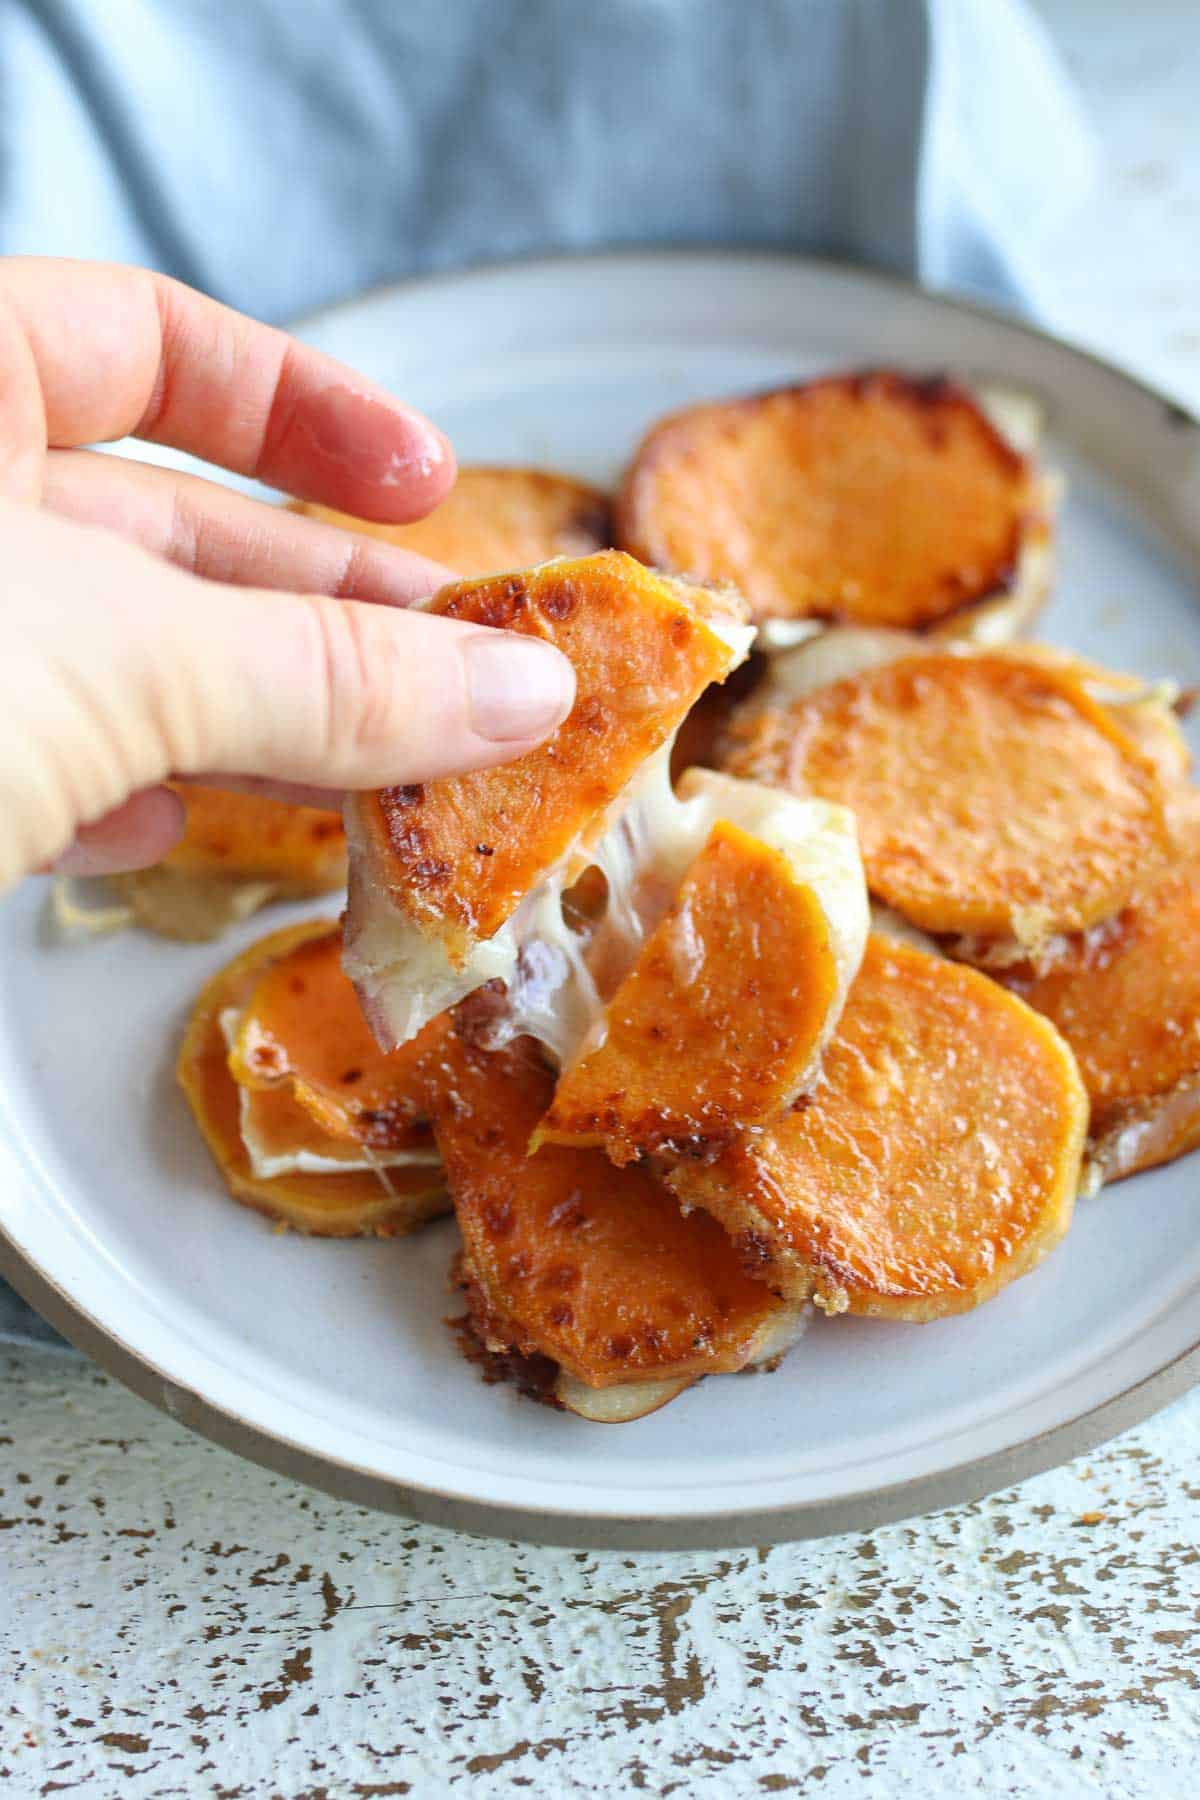 Photo showing the cheese pull from a grilled cheese bite made with sweet potatoes.